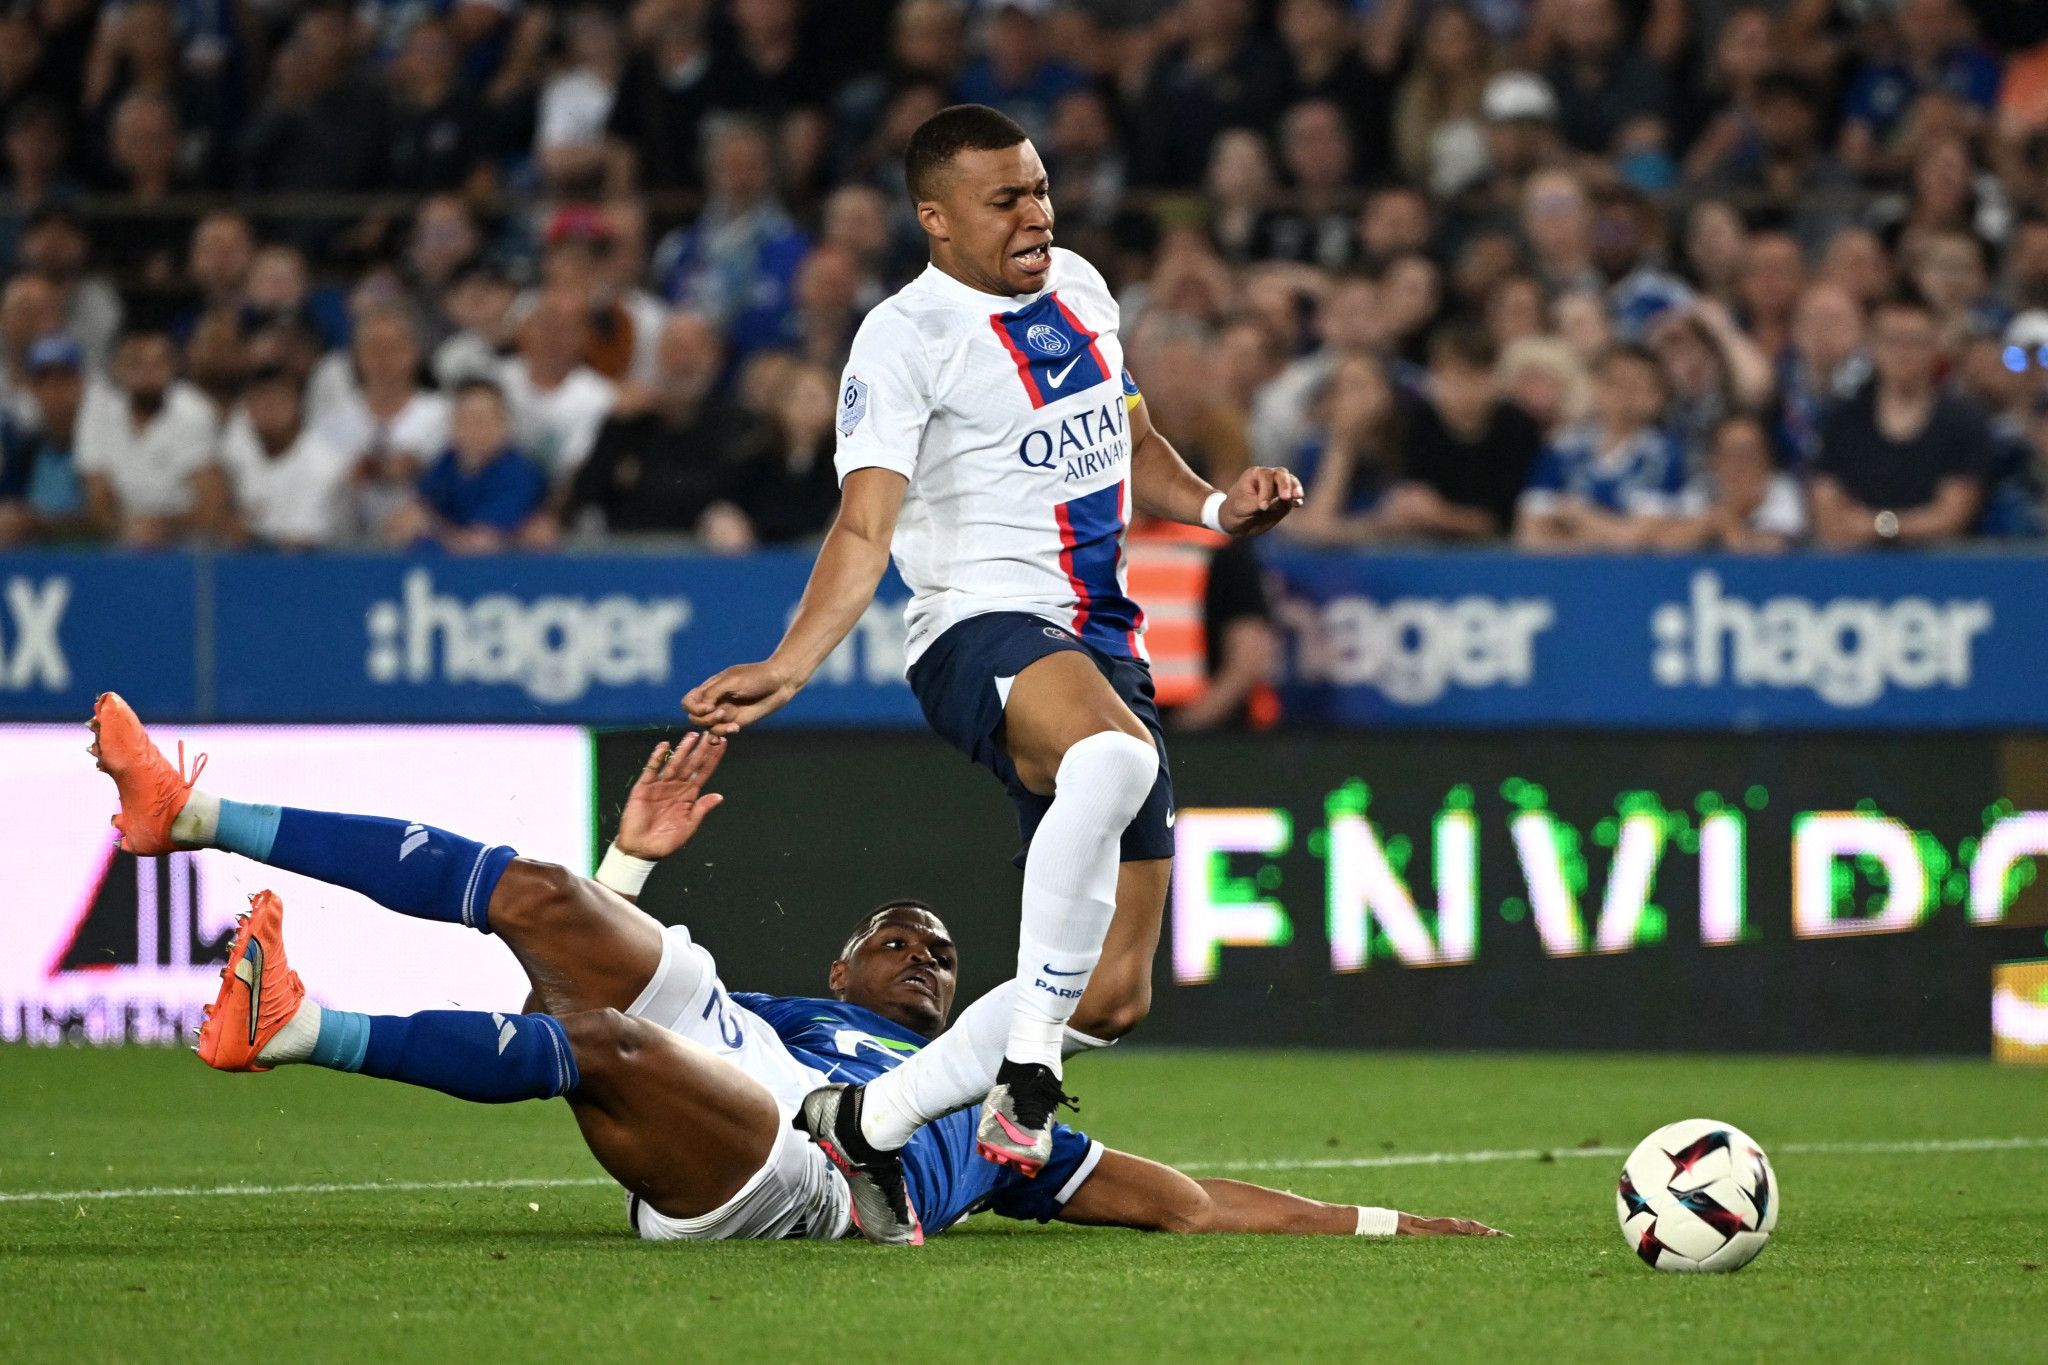 Kylian Mbappé claims that he has already made a condition of a new contract he signed last year with Paris Saint-Germain that he is allowed to play at the Olympic Games ©Getty Images